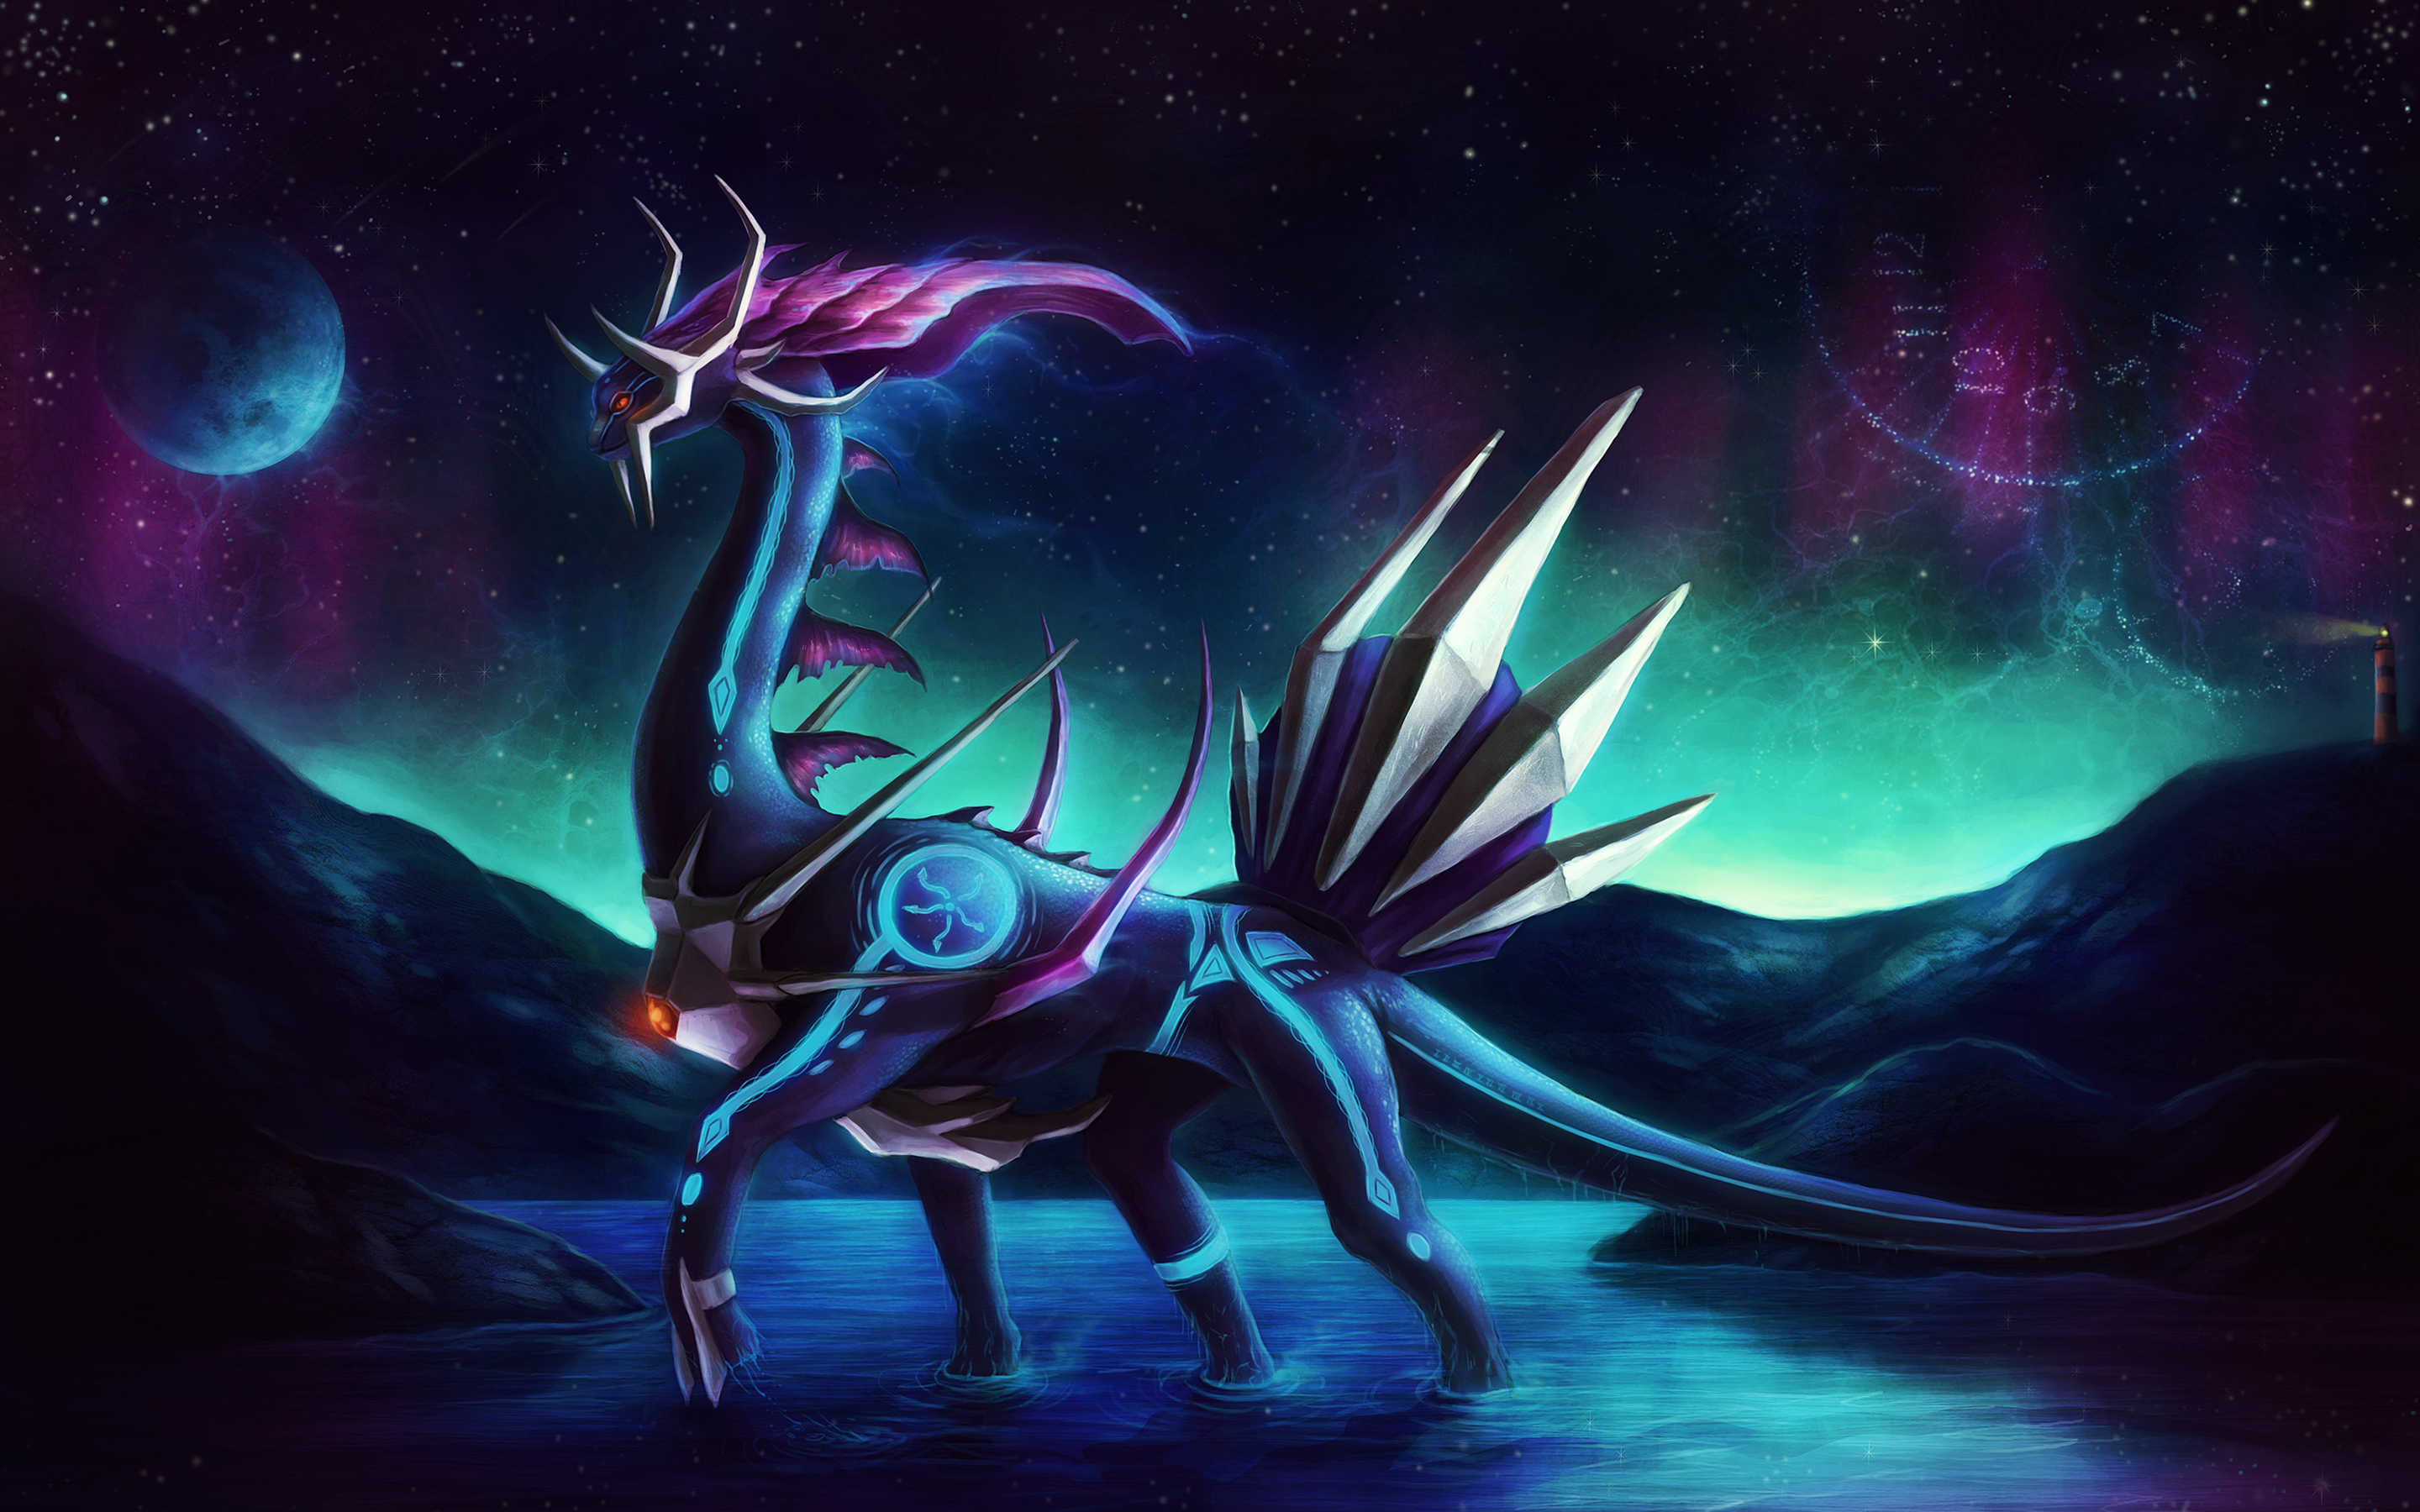 wallpapers hd pokemon,dragon,fictional character,cg artwork,mythical creature,darkness